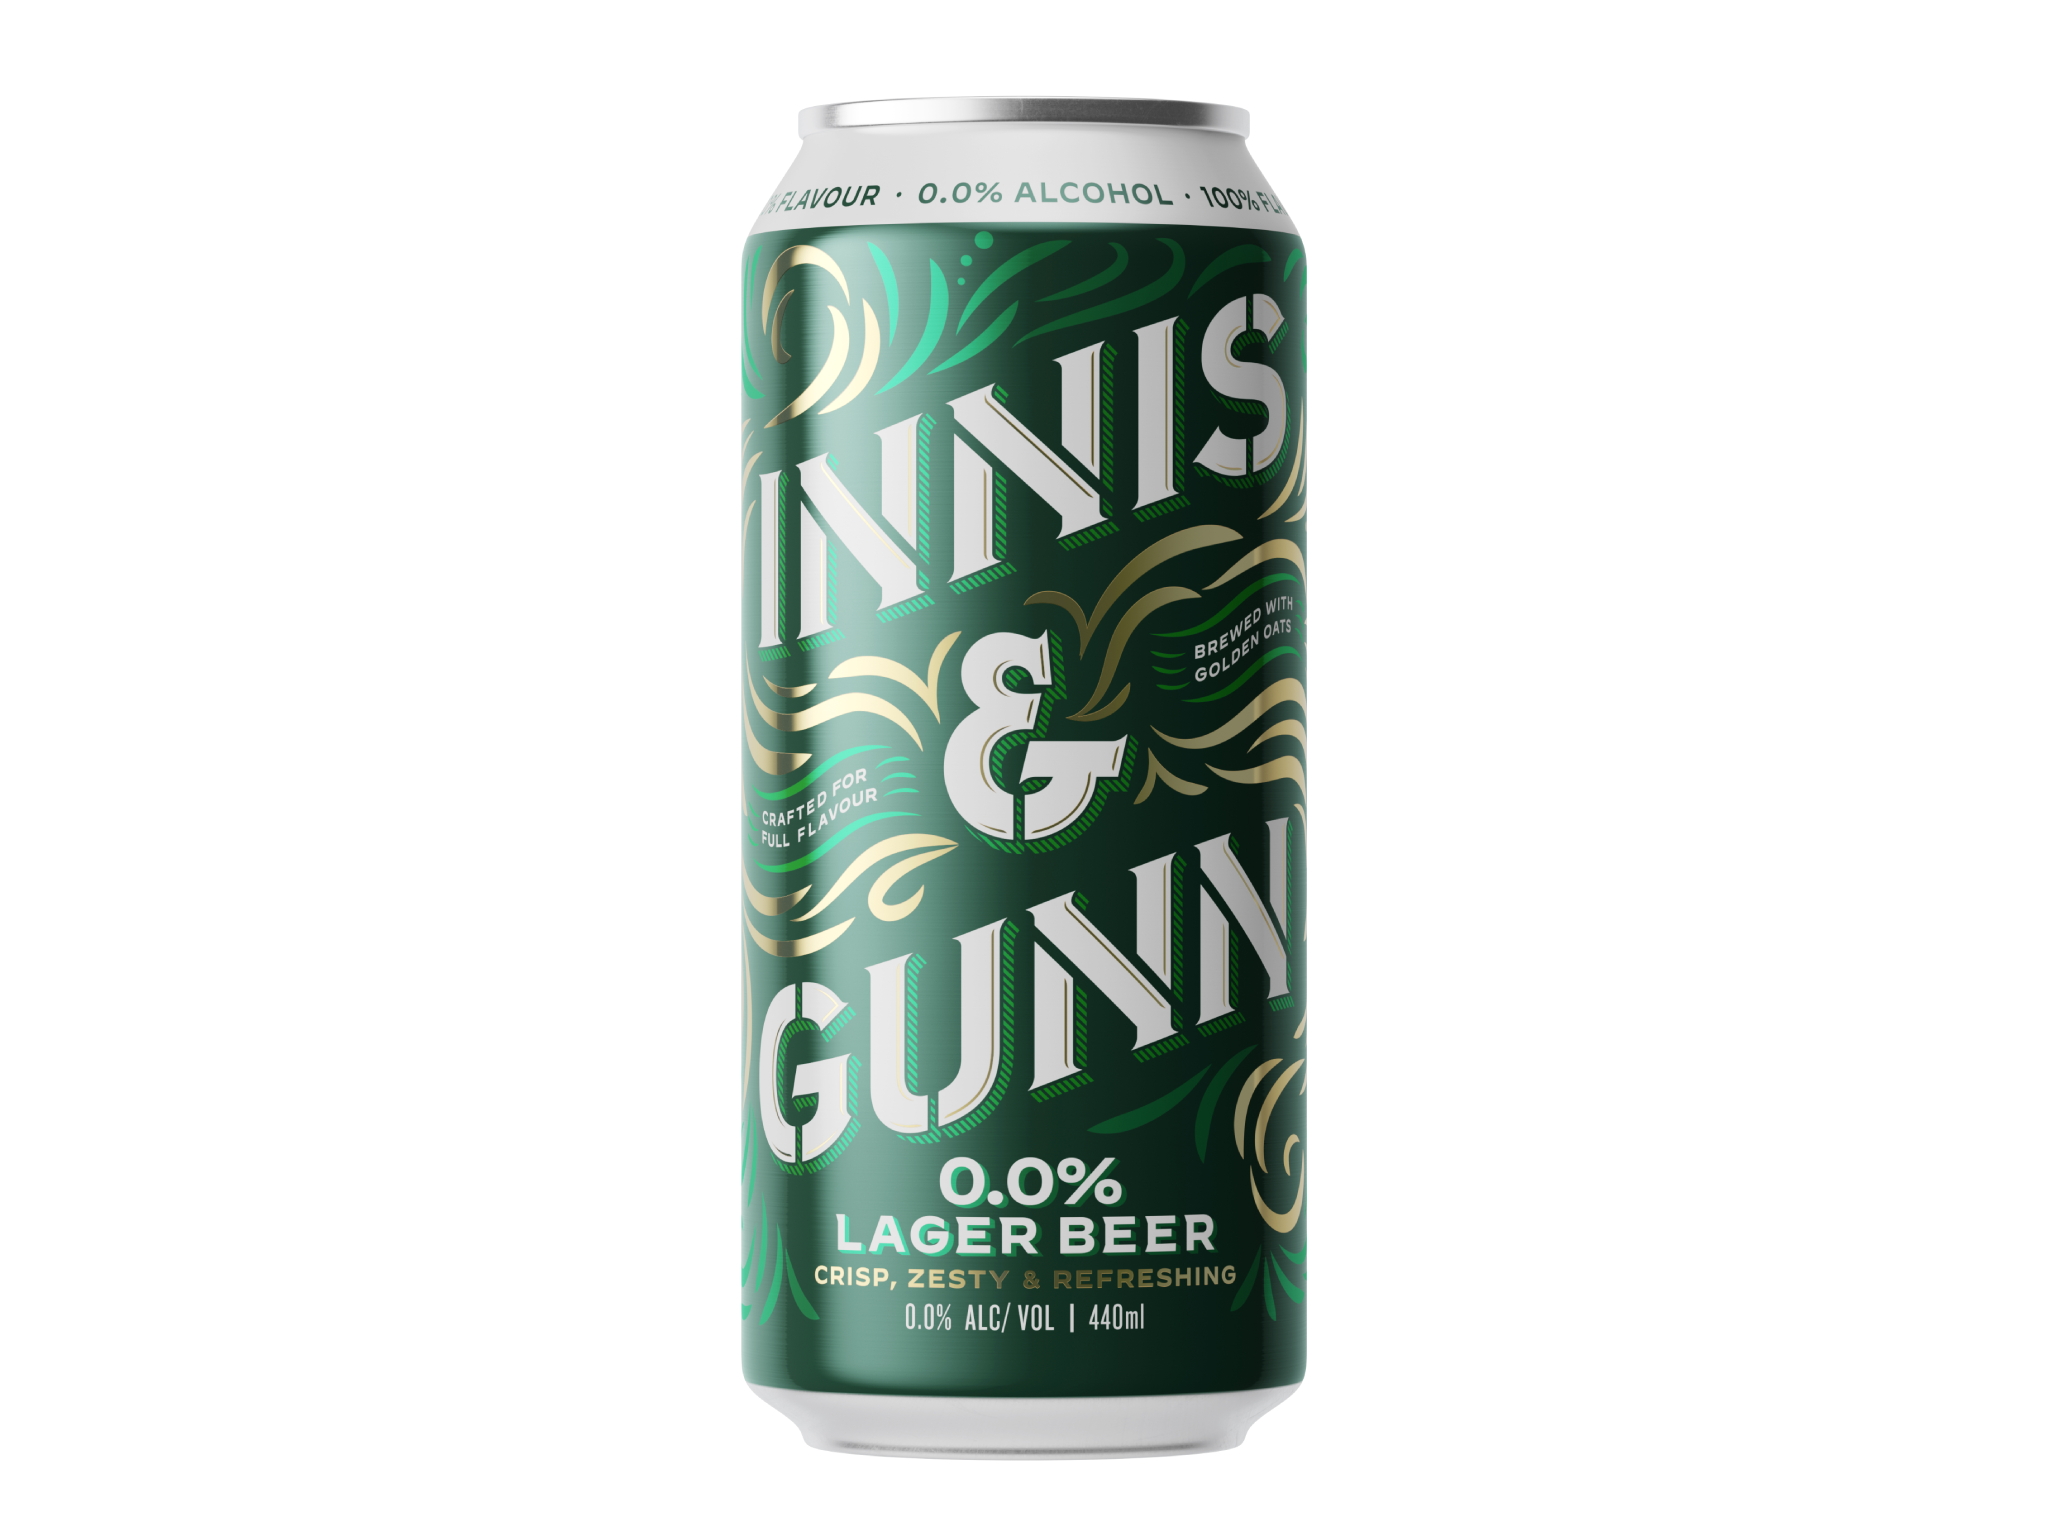 Innis & Gunn 0.0% alcohol-free lager beer-indybest